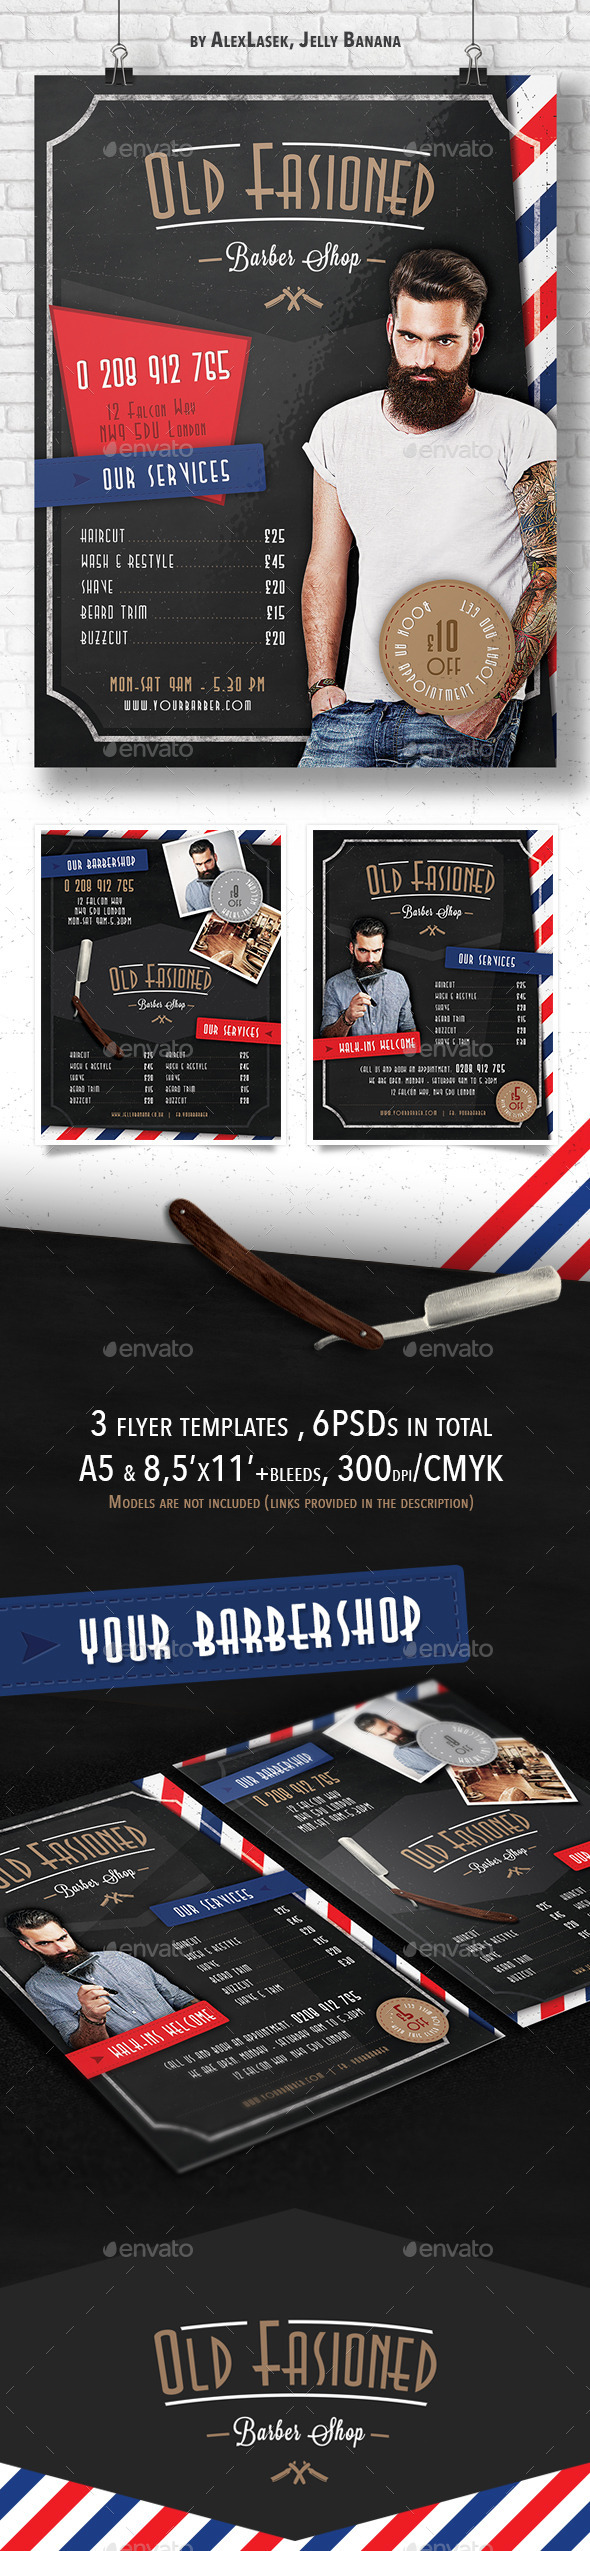 3 Old Fashioned Barber Shop Flyer Templates 6PSD